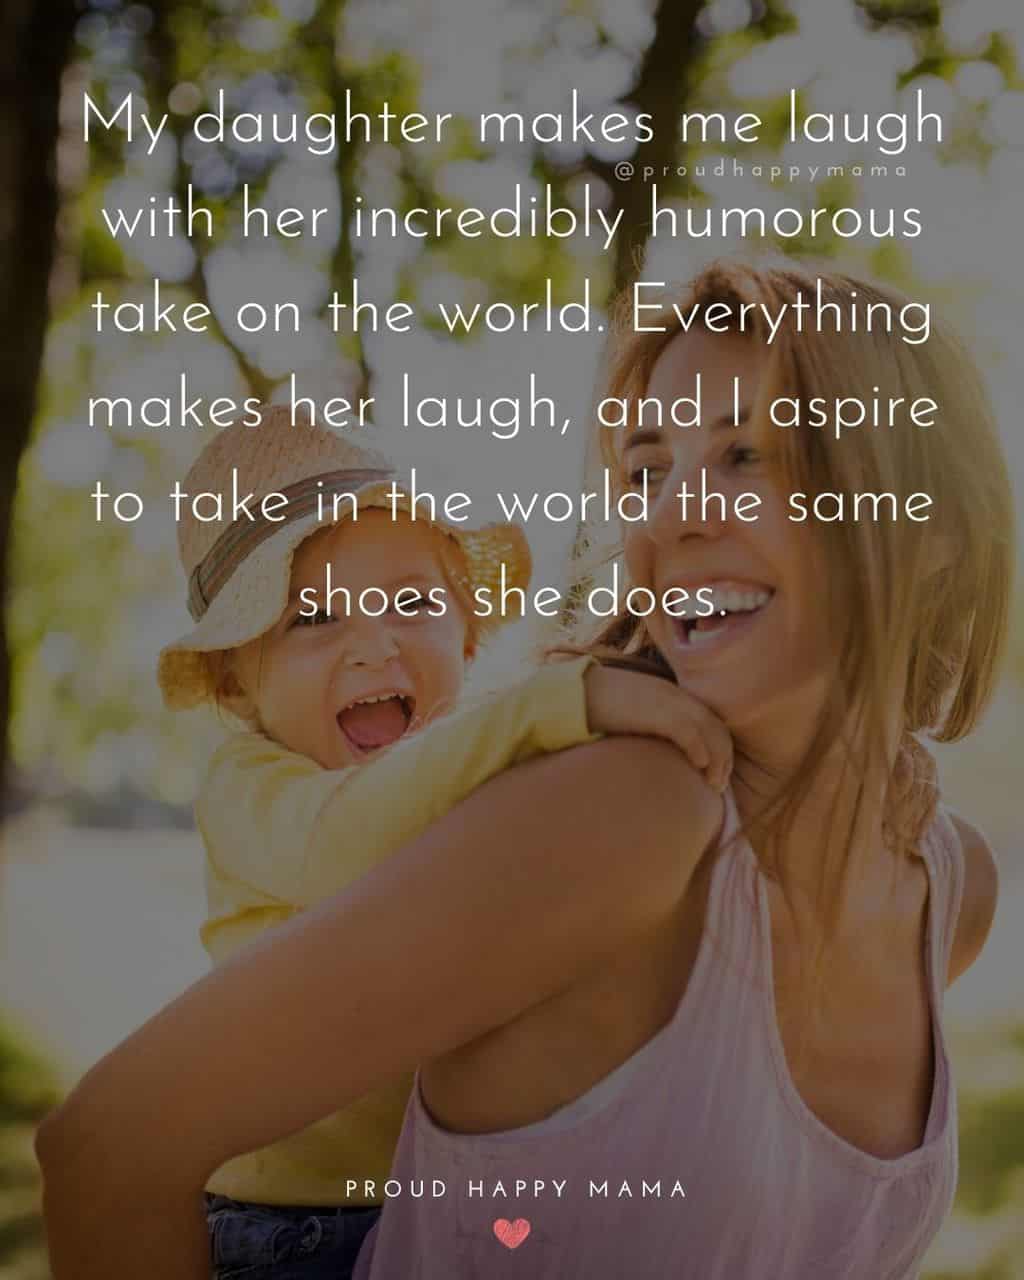 i love my daughter short quotes - ‘My daughter makes me laugh with her incredibly humorous take on the world. Everything makes her laugh, and I aspire